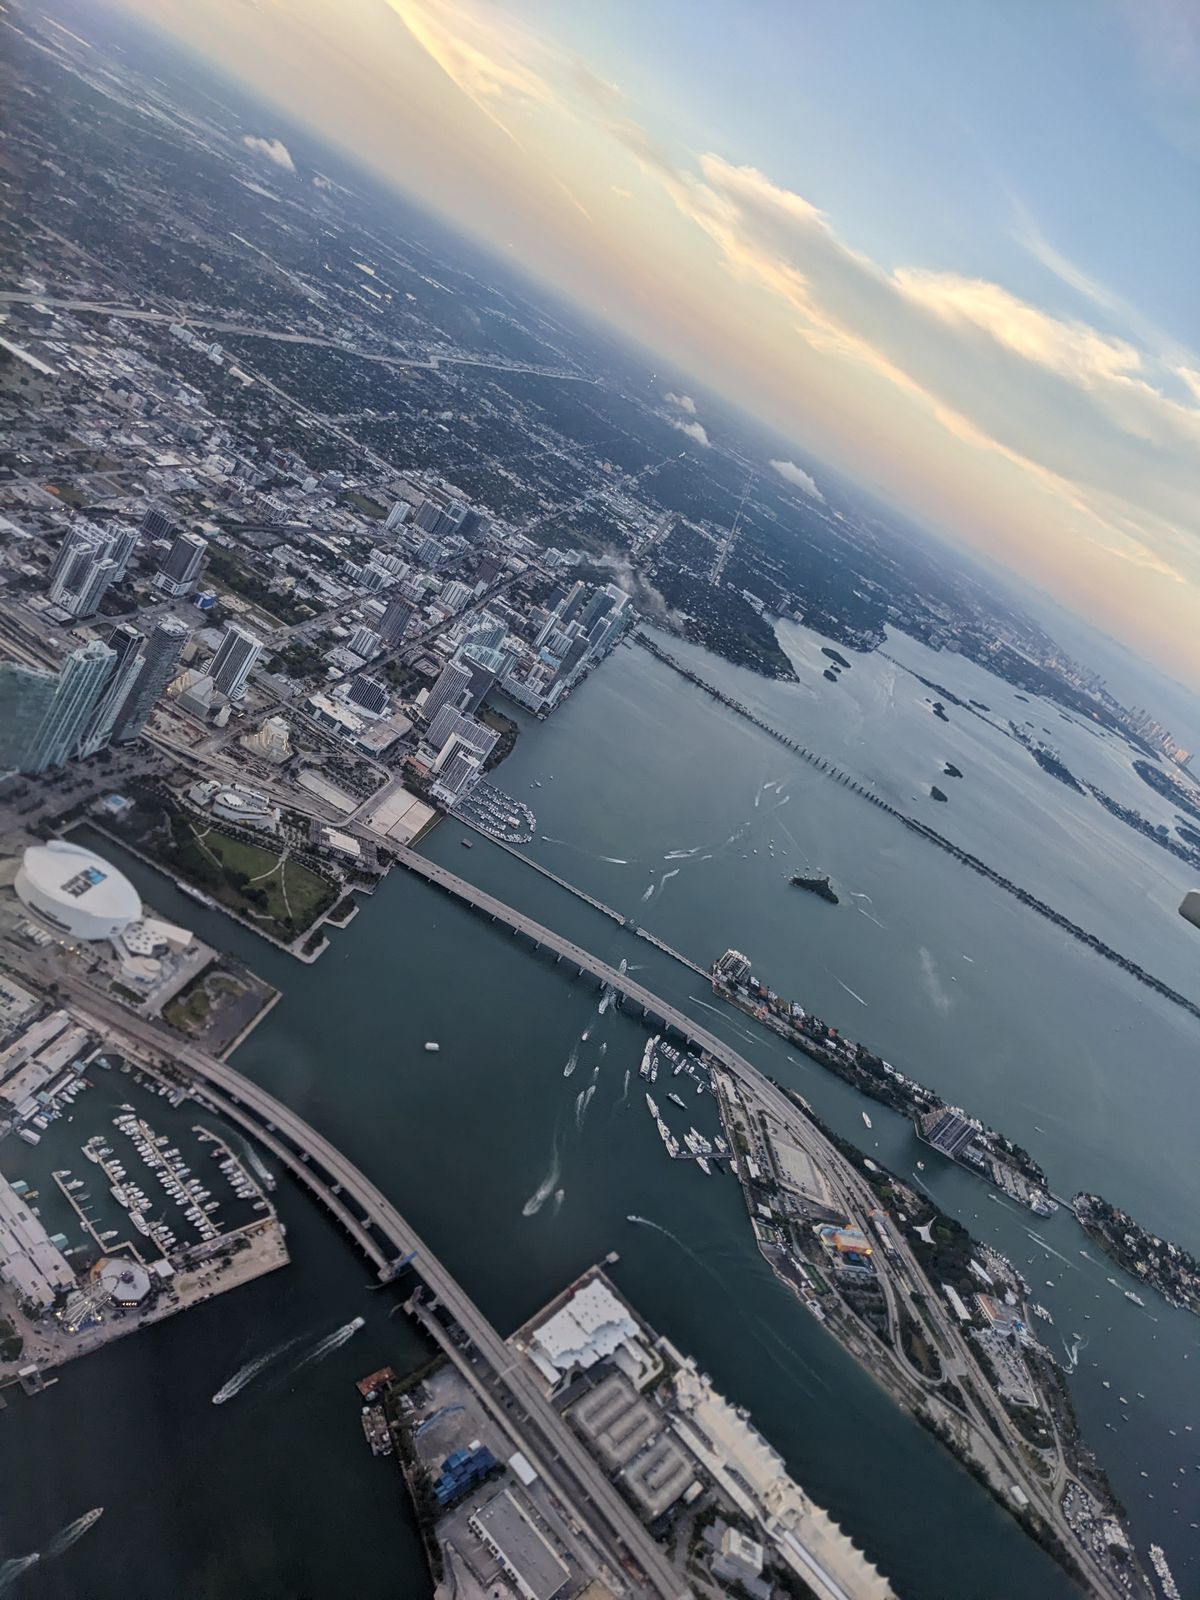 An aerial view of Miami’s shoreline, with its bridges, bays, and islands spread out below.